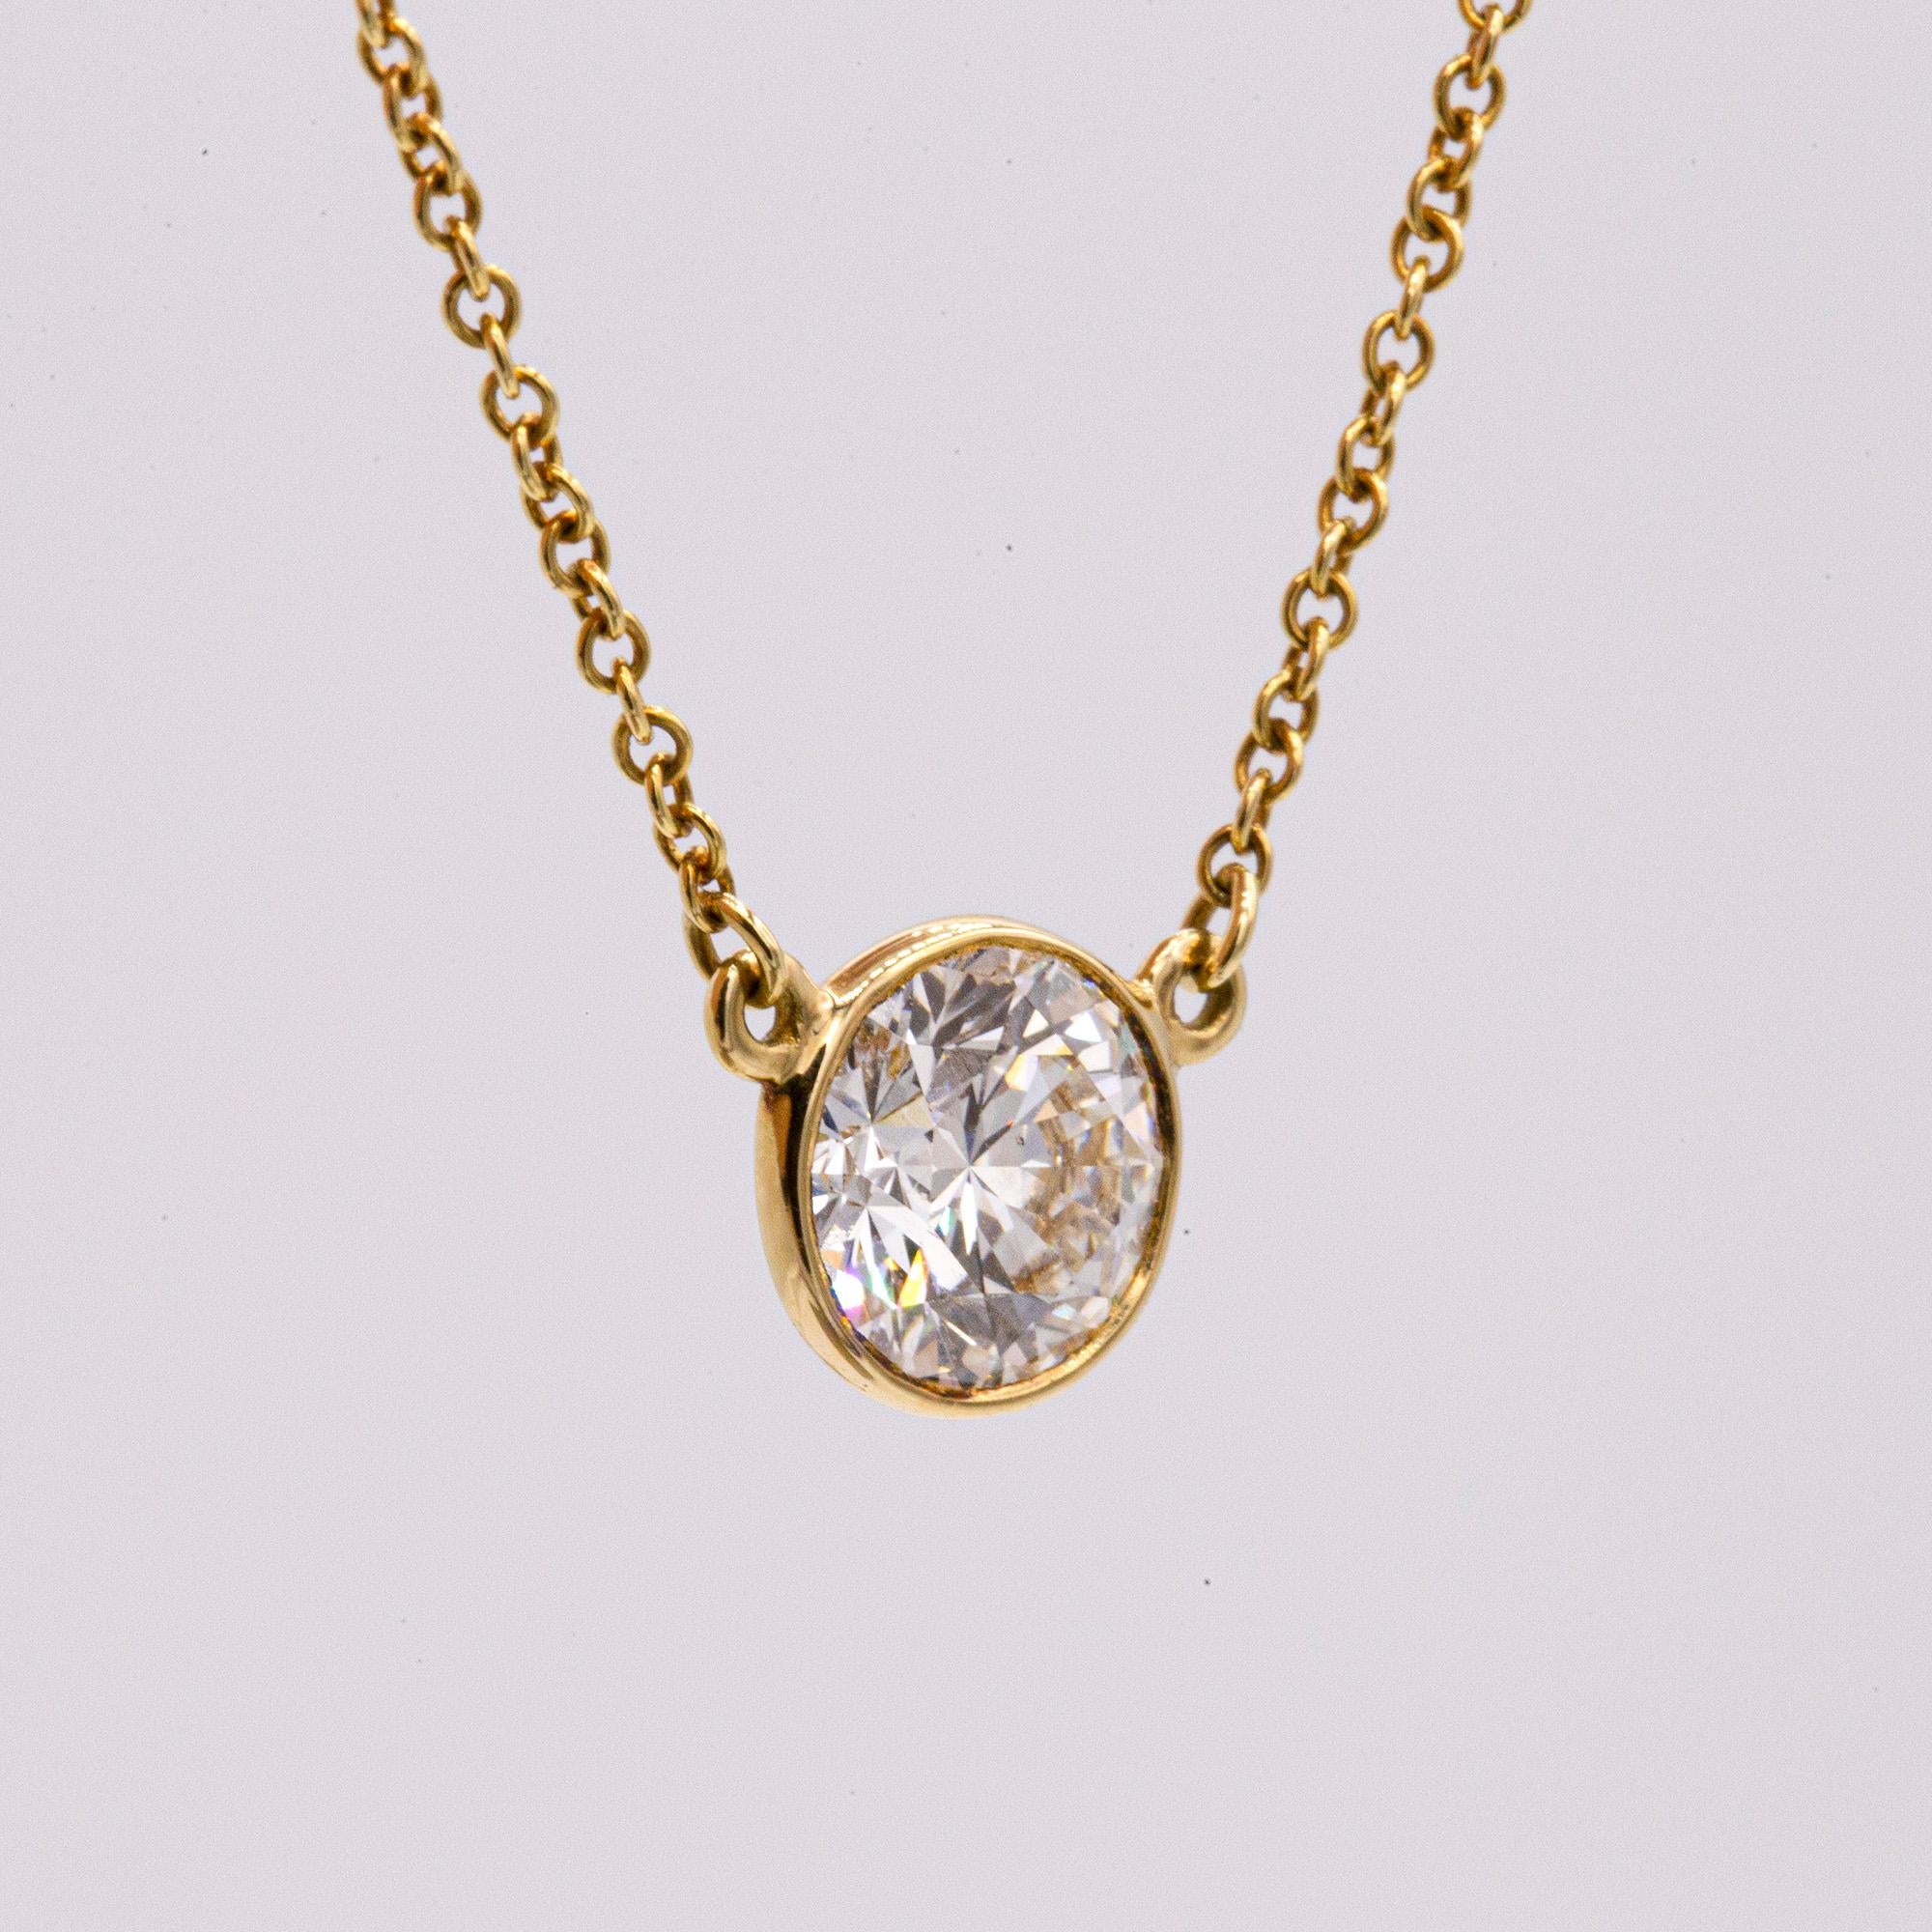 Vintage 18K Yellow Gold Tiffany & Co  Elsa Peretti bezel set diamond necklace with one
round brilliant diamond weighting 1.16CTW. The diamond is G in color and VS1 in clarity.
The chain measures 16 inches.